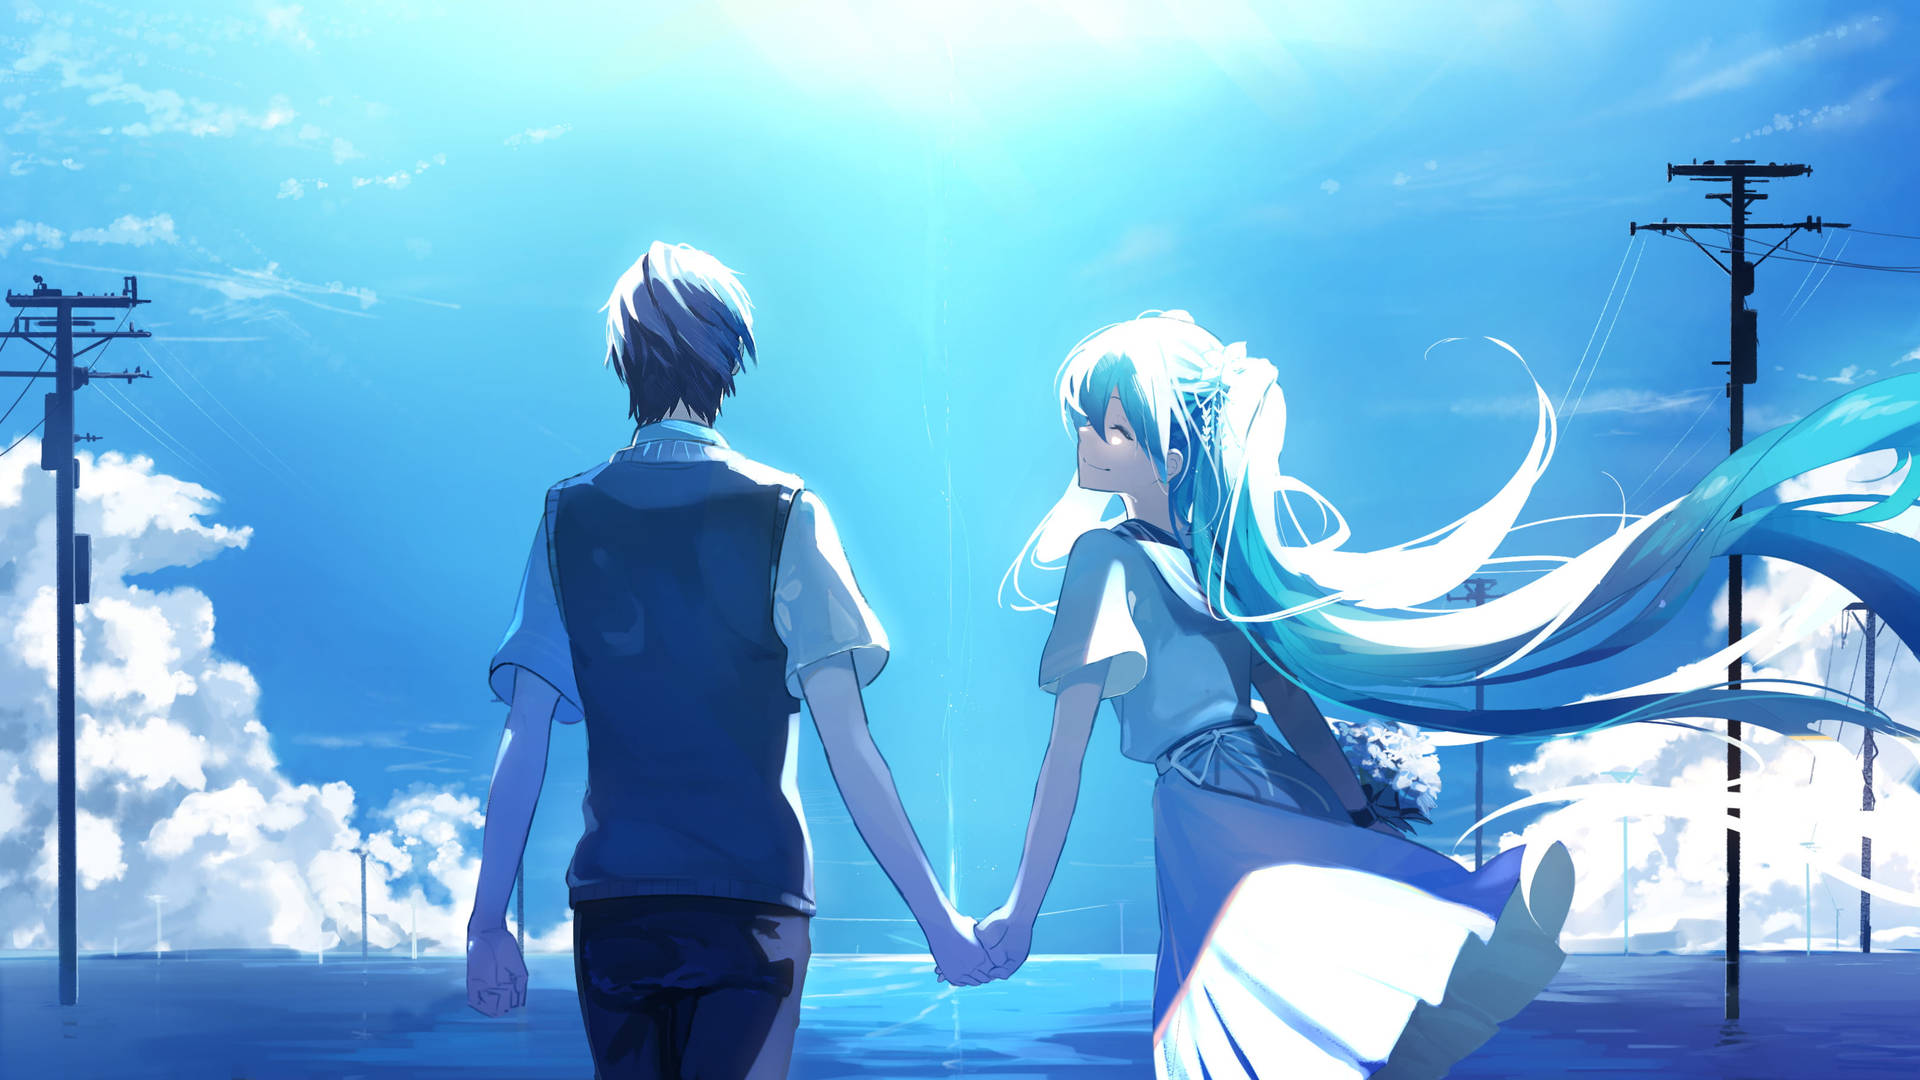 Cute Anime Couple In Tinted Blue Wallpaper